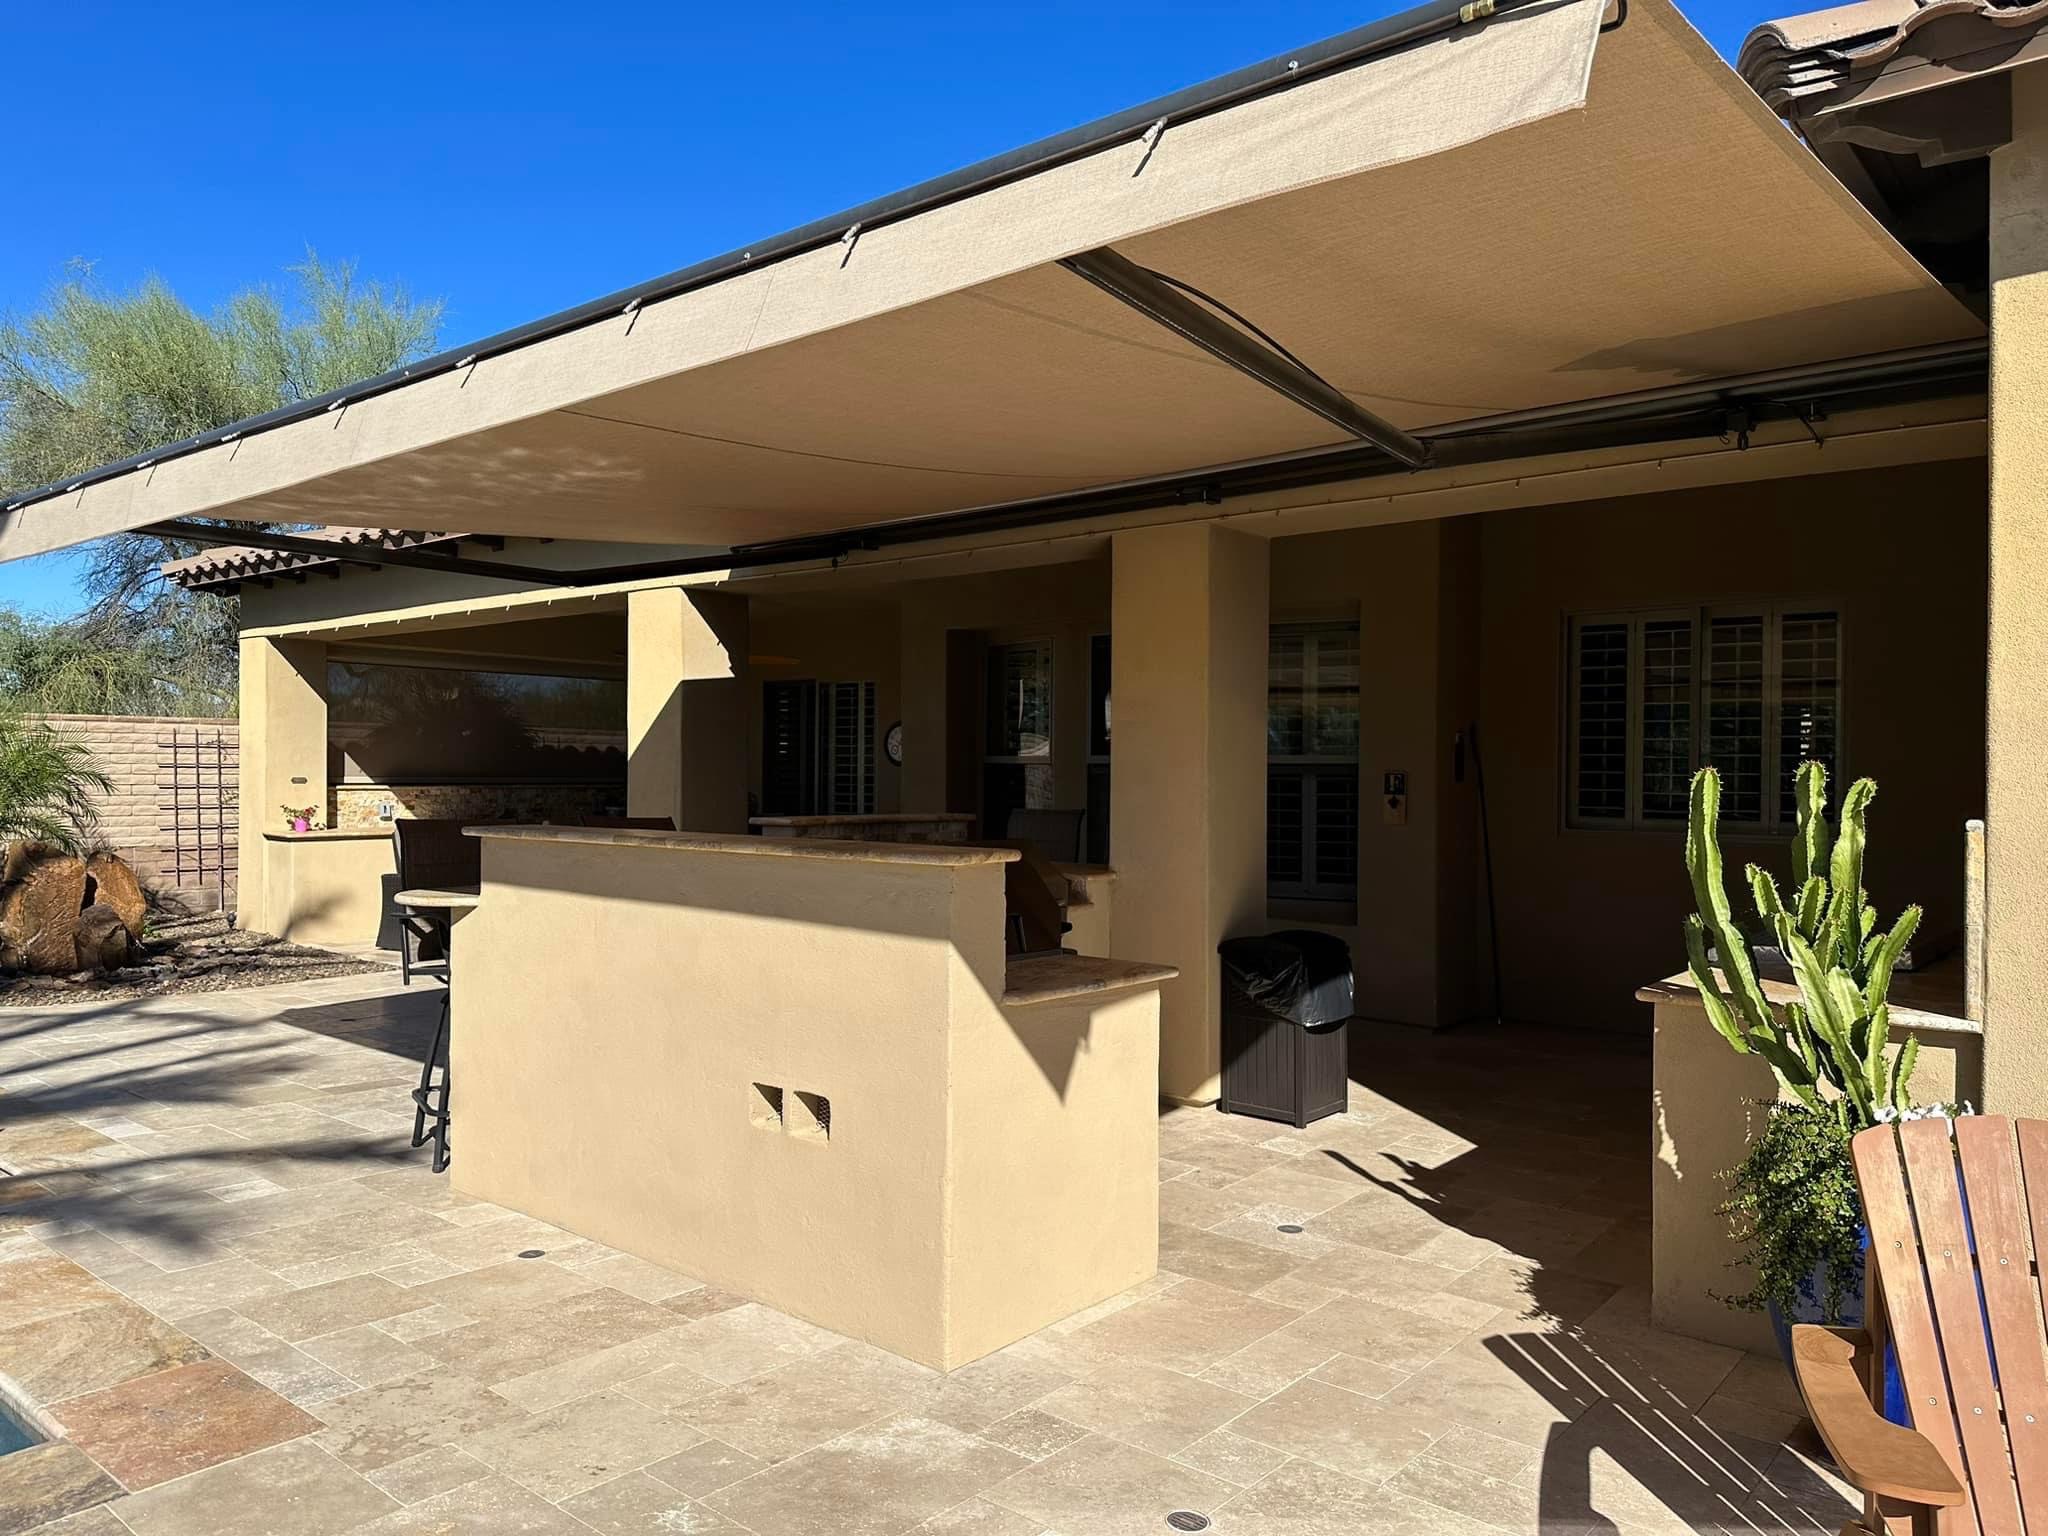 Shade Solutions for the Best Patios in Phoenix